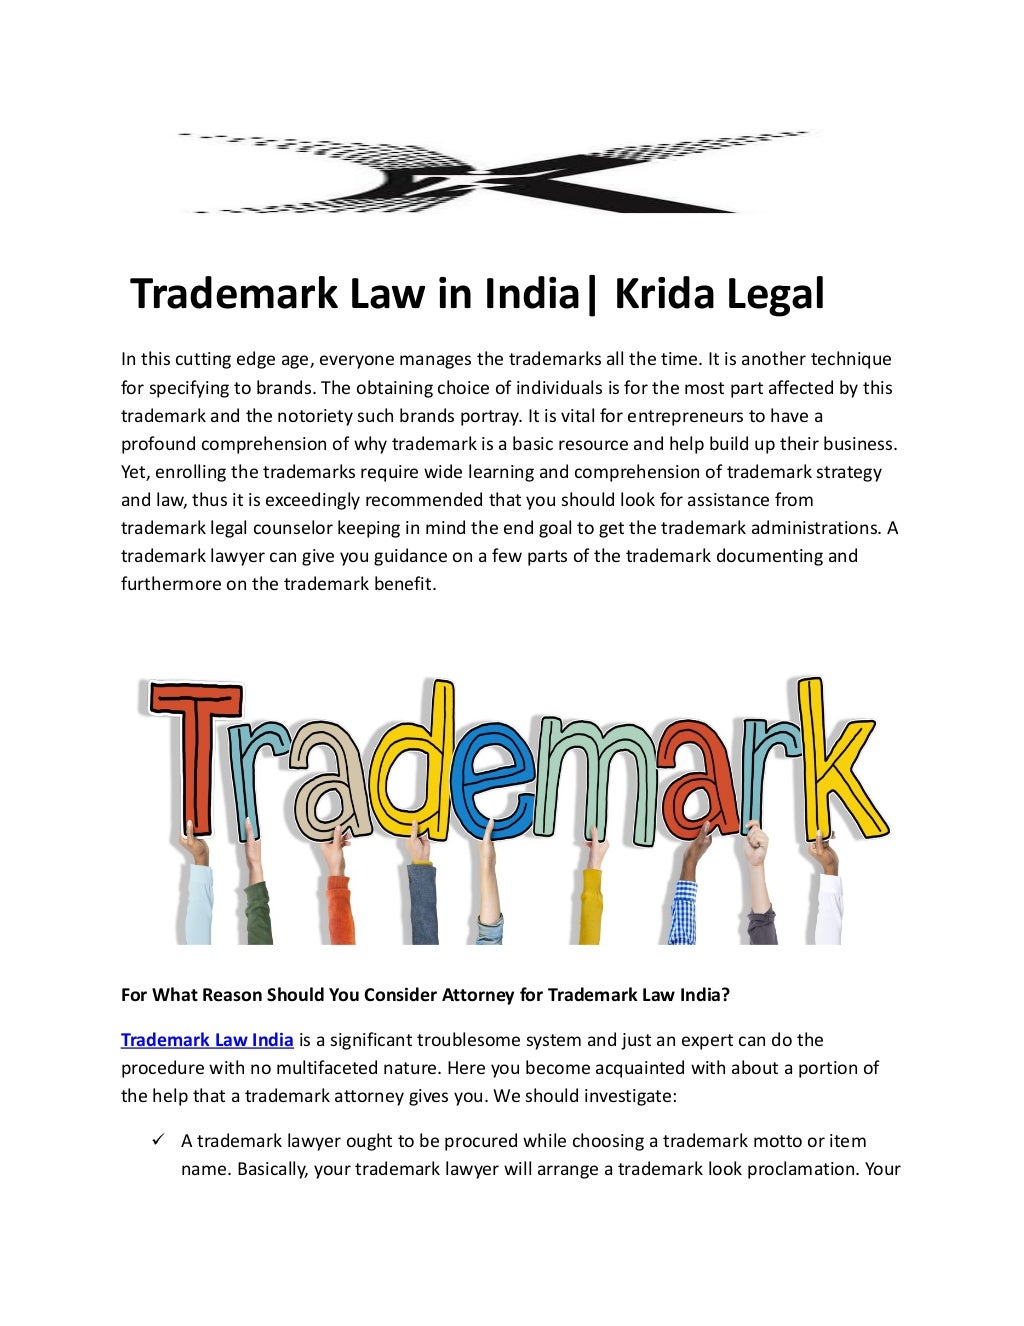 dissertation on trademark law in india